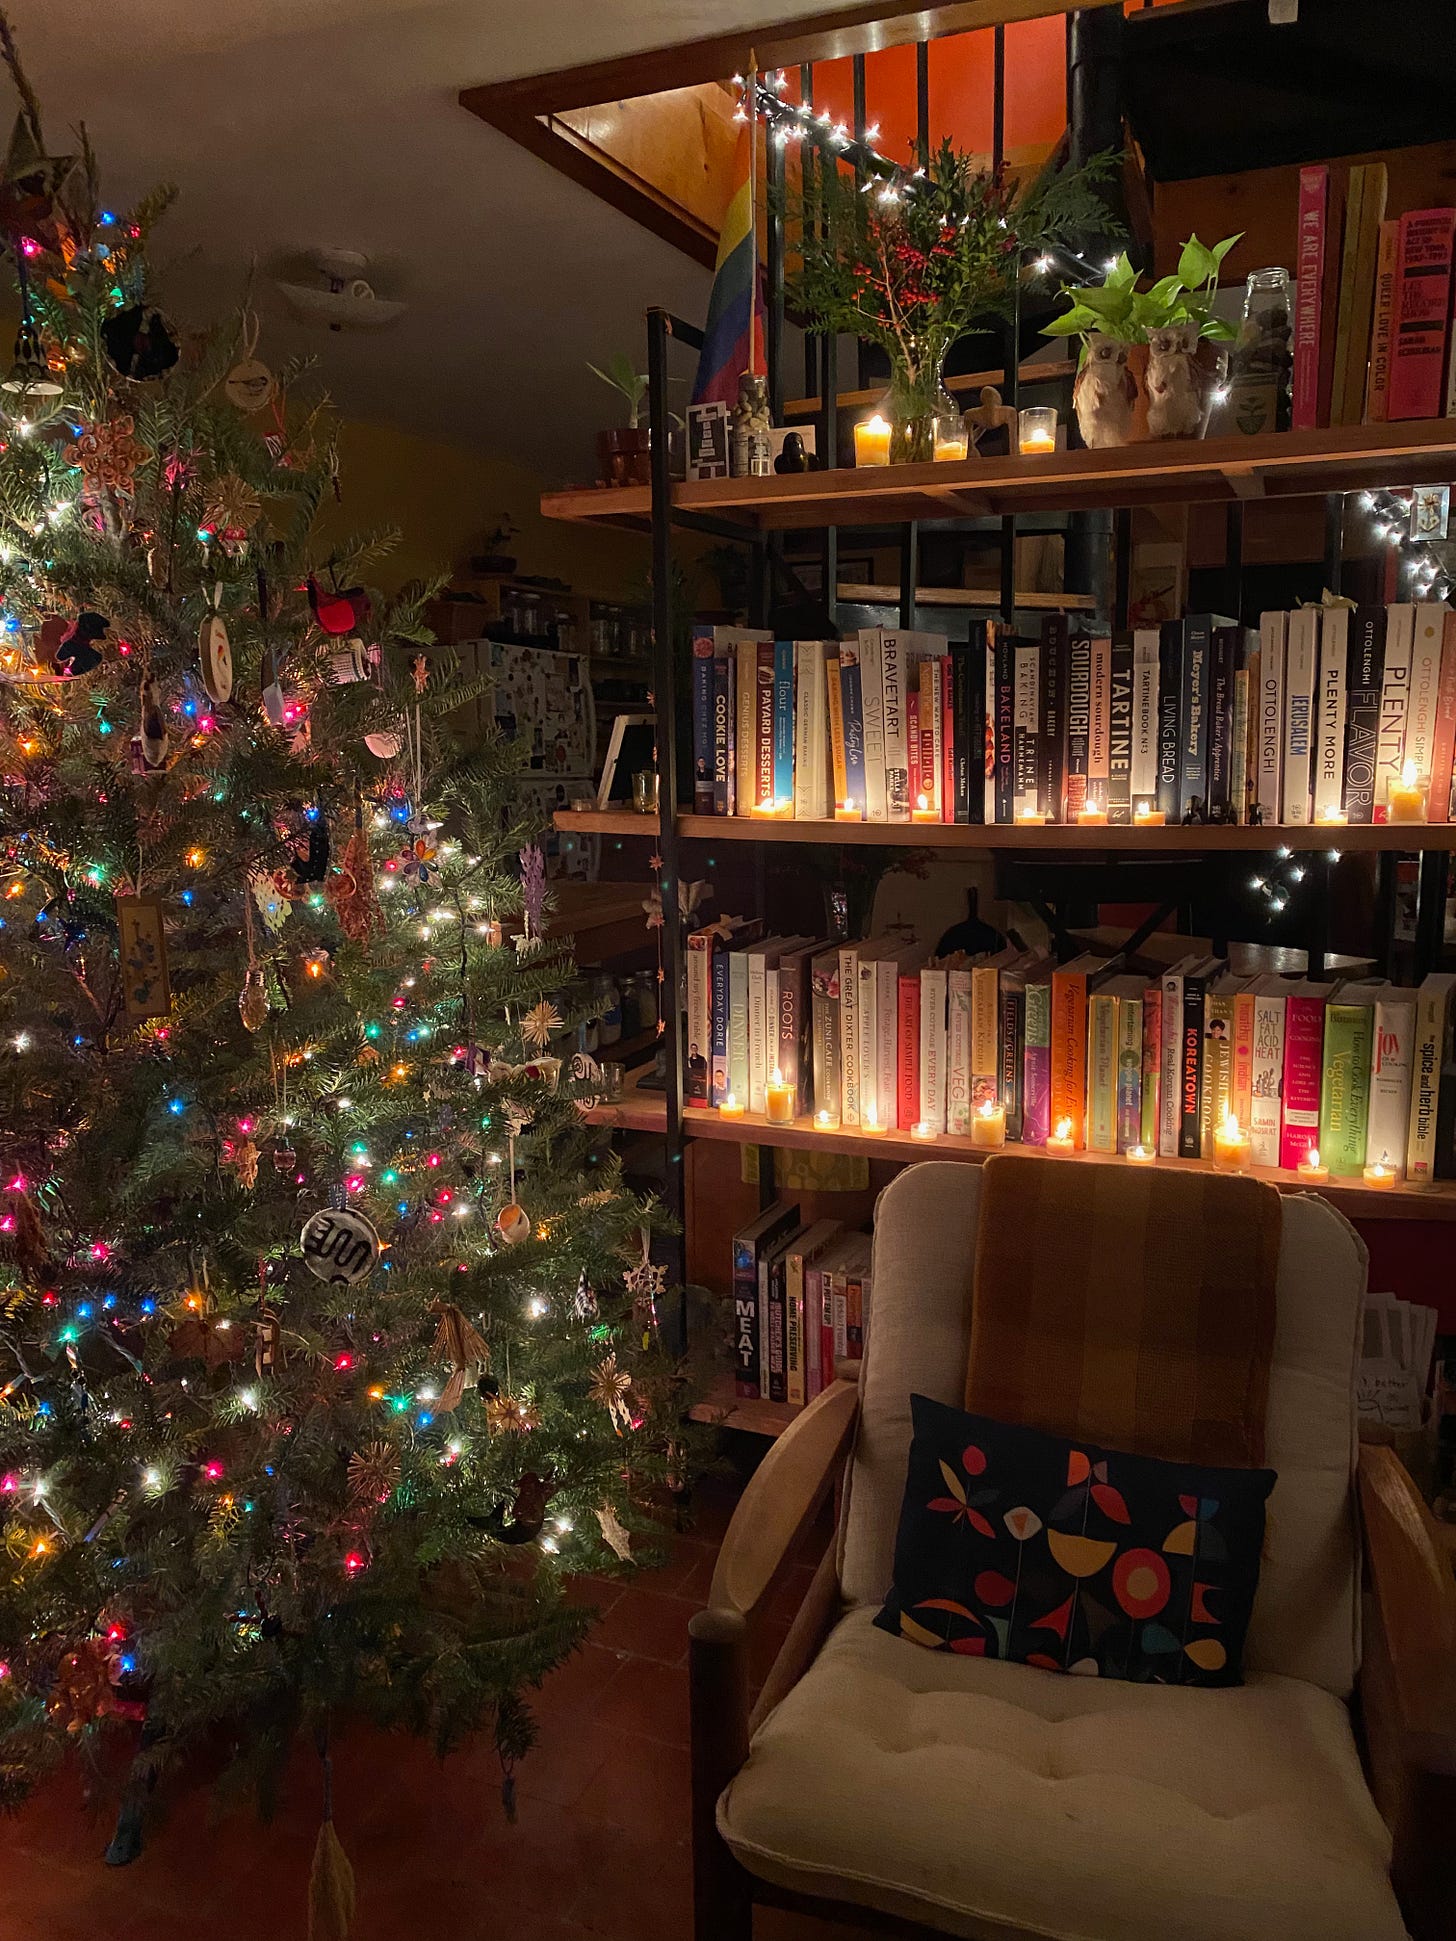 A large open bookcase full of cookbooks, with rows of lit candles in front of the books. There are lights on the spiral staircase behind the bookcase, and brightly lit and decorated Christmas tree in front. A armchair with a small throw pillow sits next to the Christmas tree.